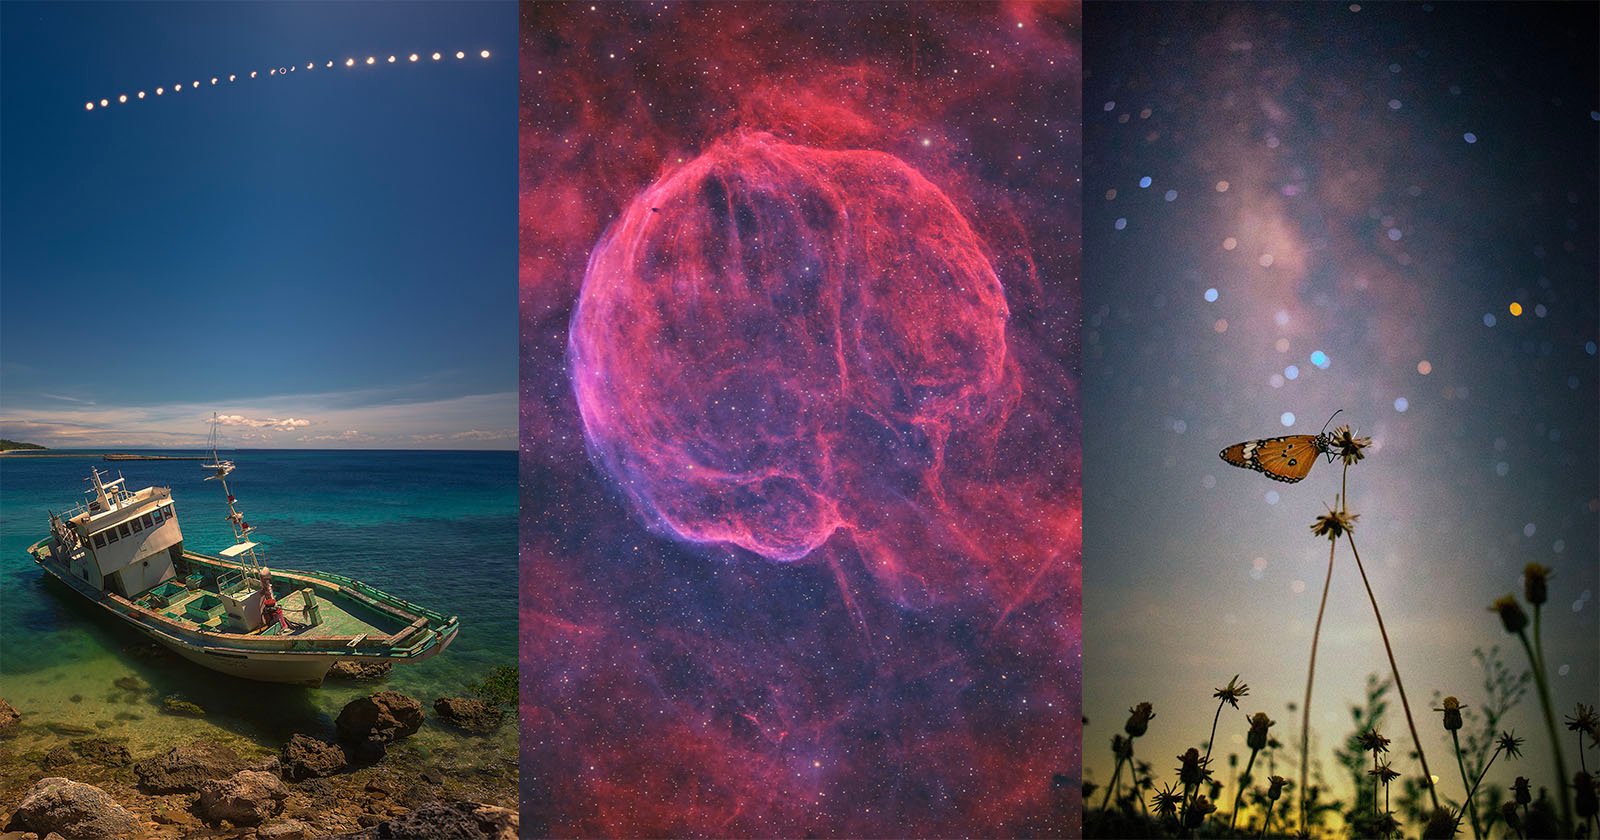 Celestial images shine in the National Astrophotography Competition